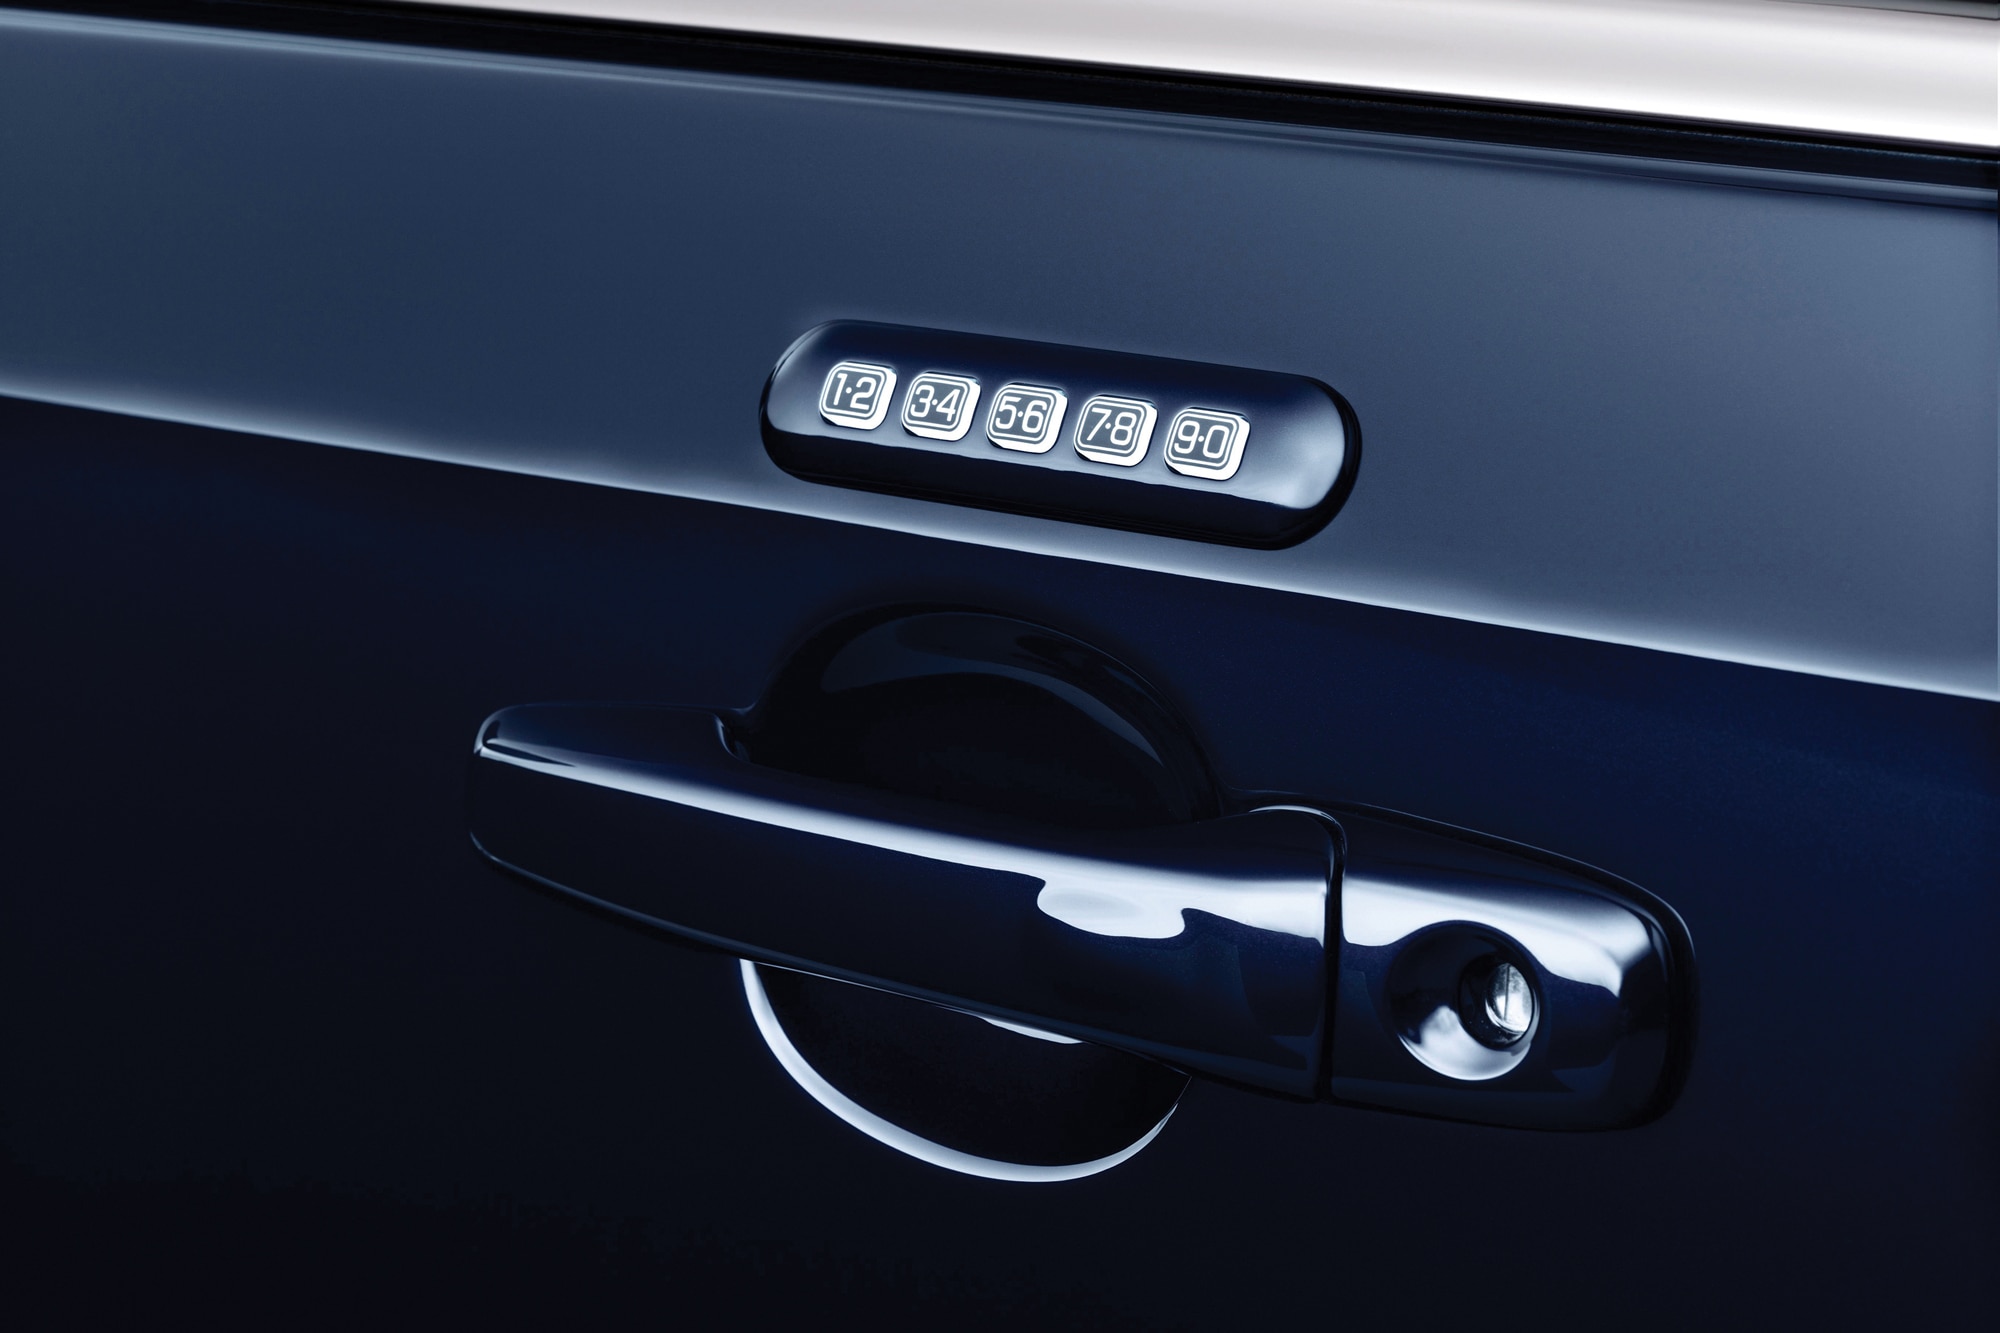  Ford vintage keyless entry pin pad above the door handle on a blue car